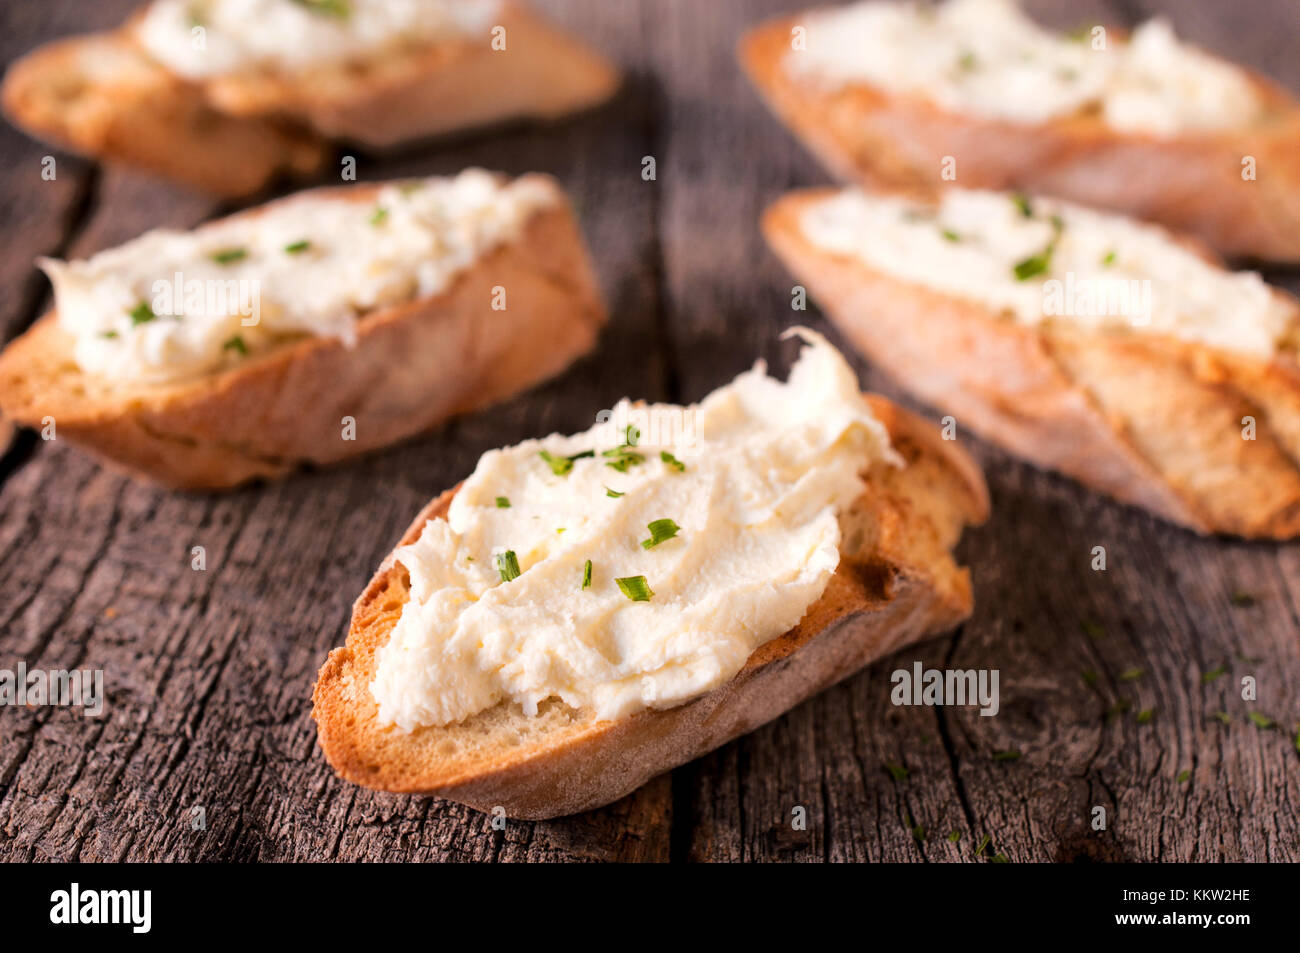 Selective focus in the middle of front bruschetta with cheese cream Stock Photo